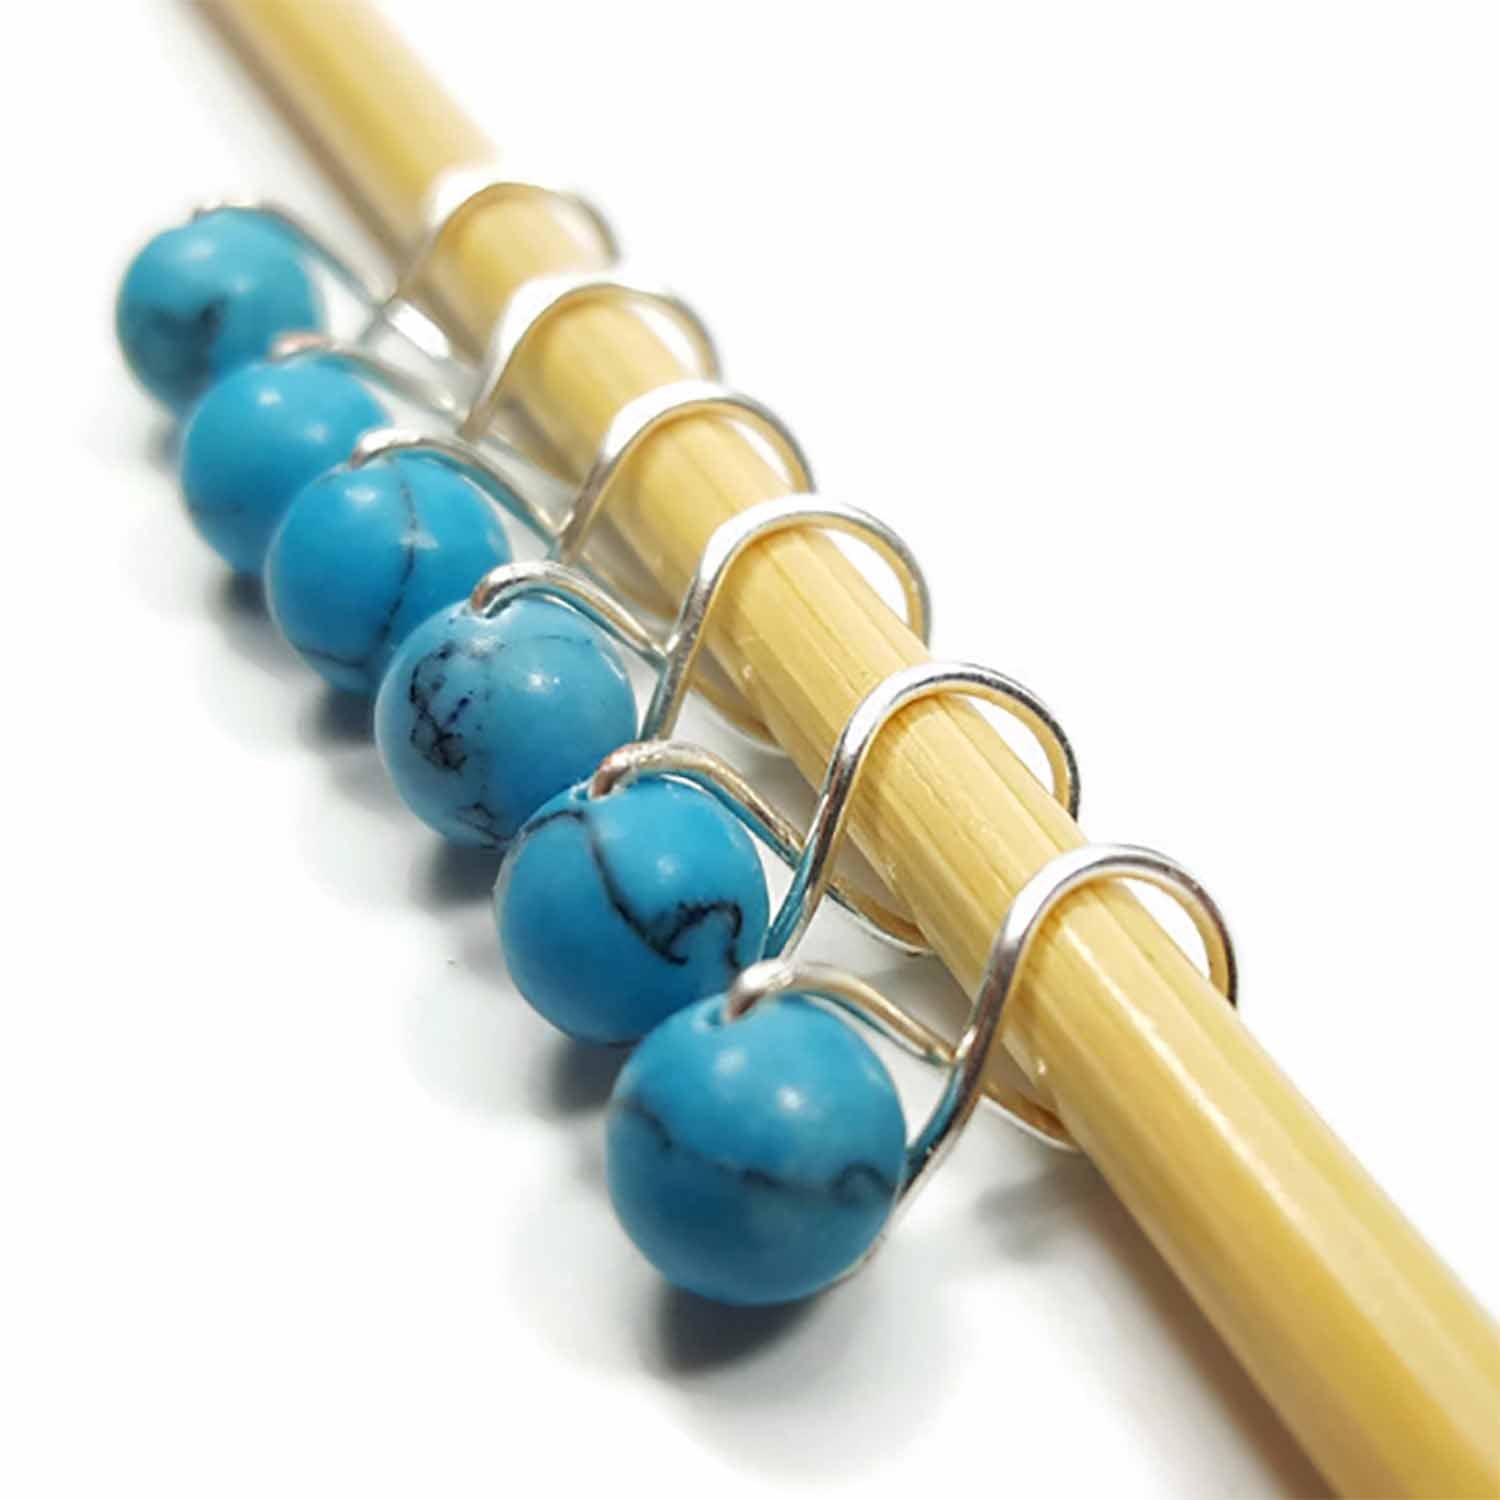 Turquoise Knitting or Crochet Stitch Markers